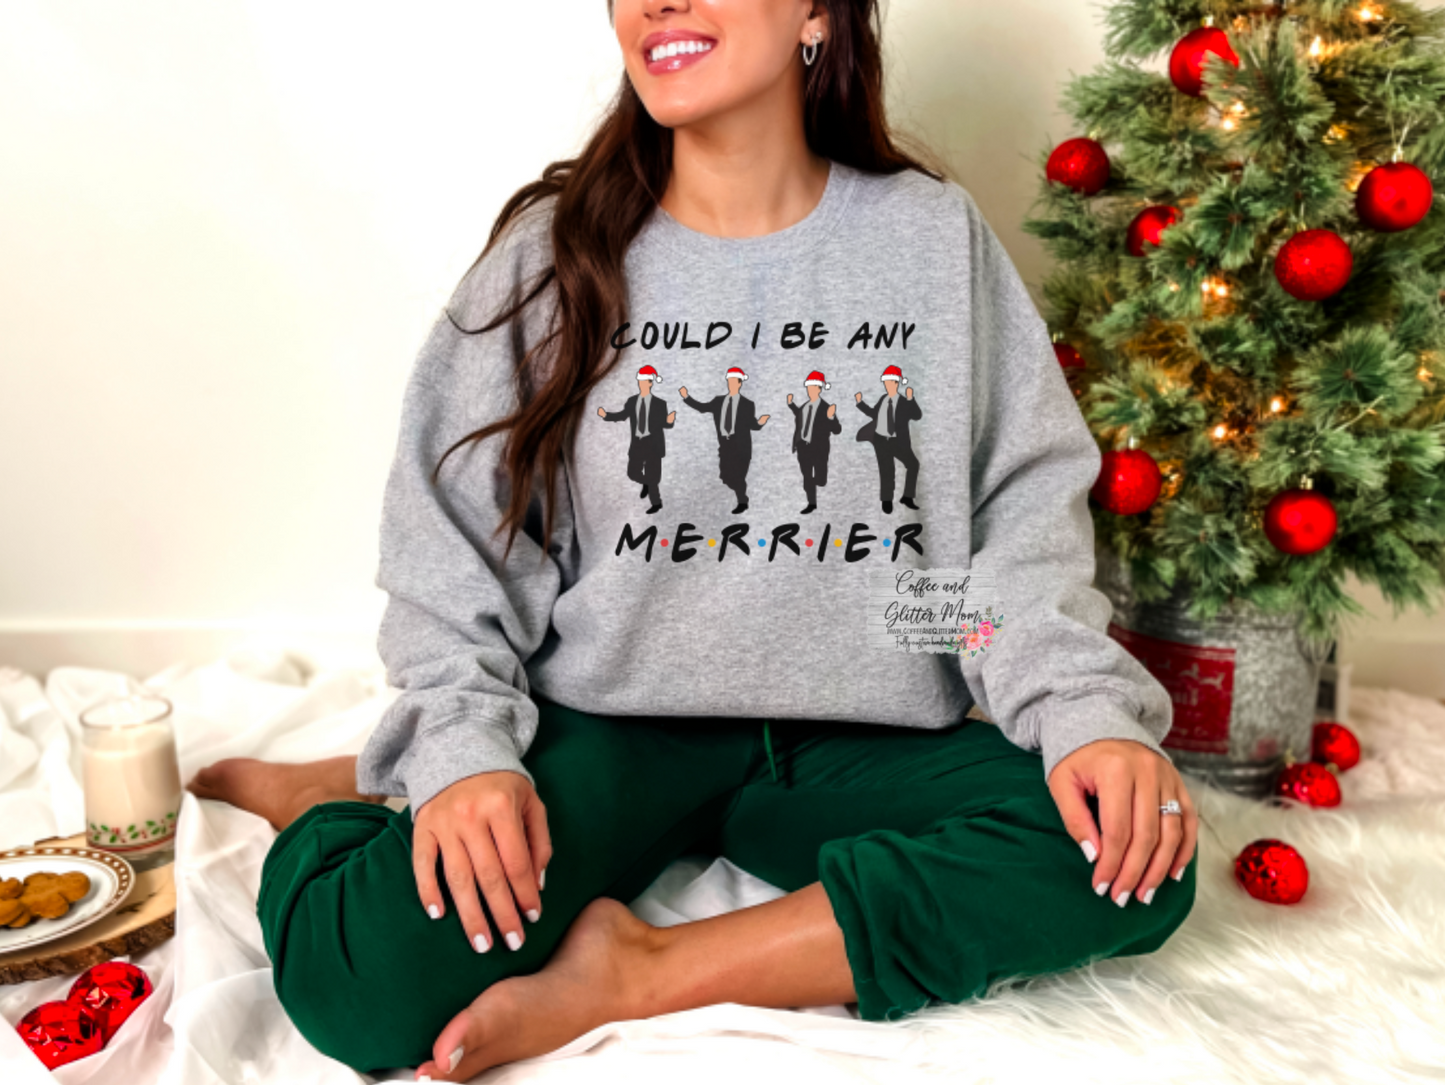 Could I BE Any Merrier? Friends Christmas Sweatshirt